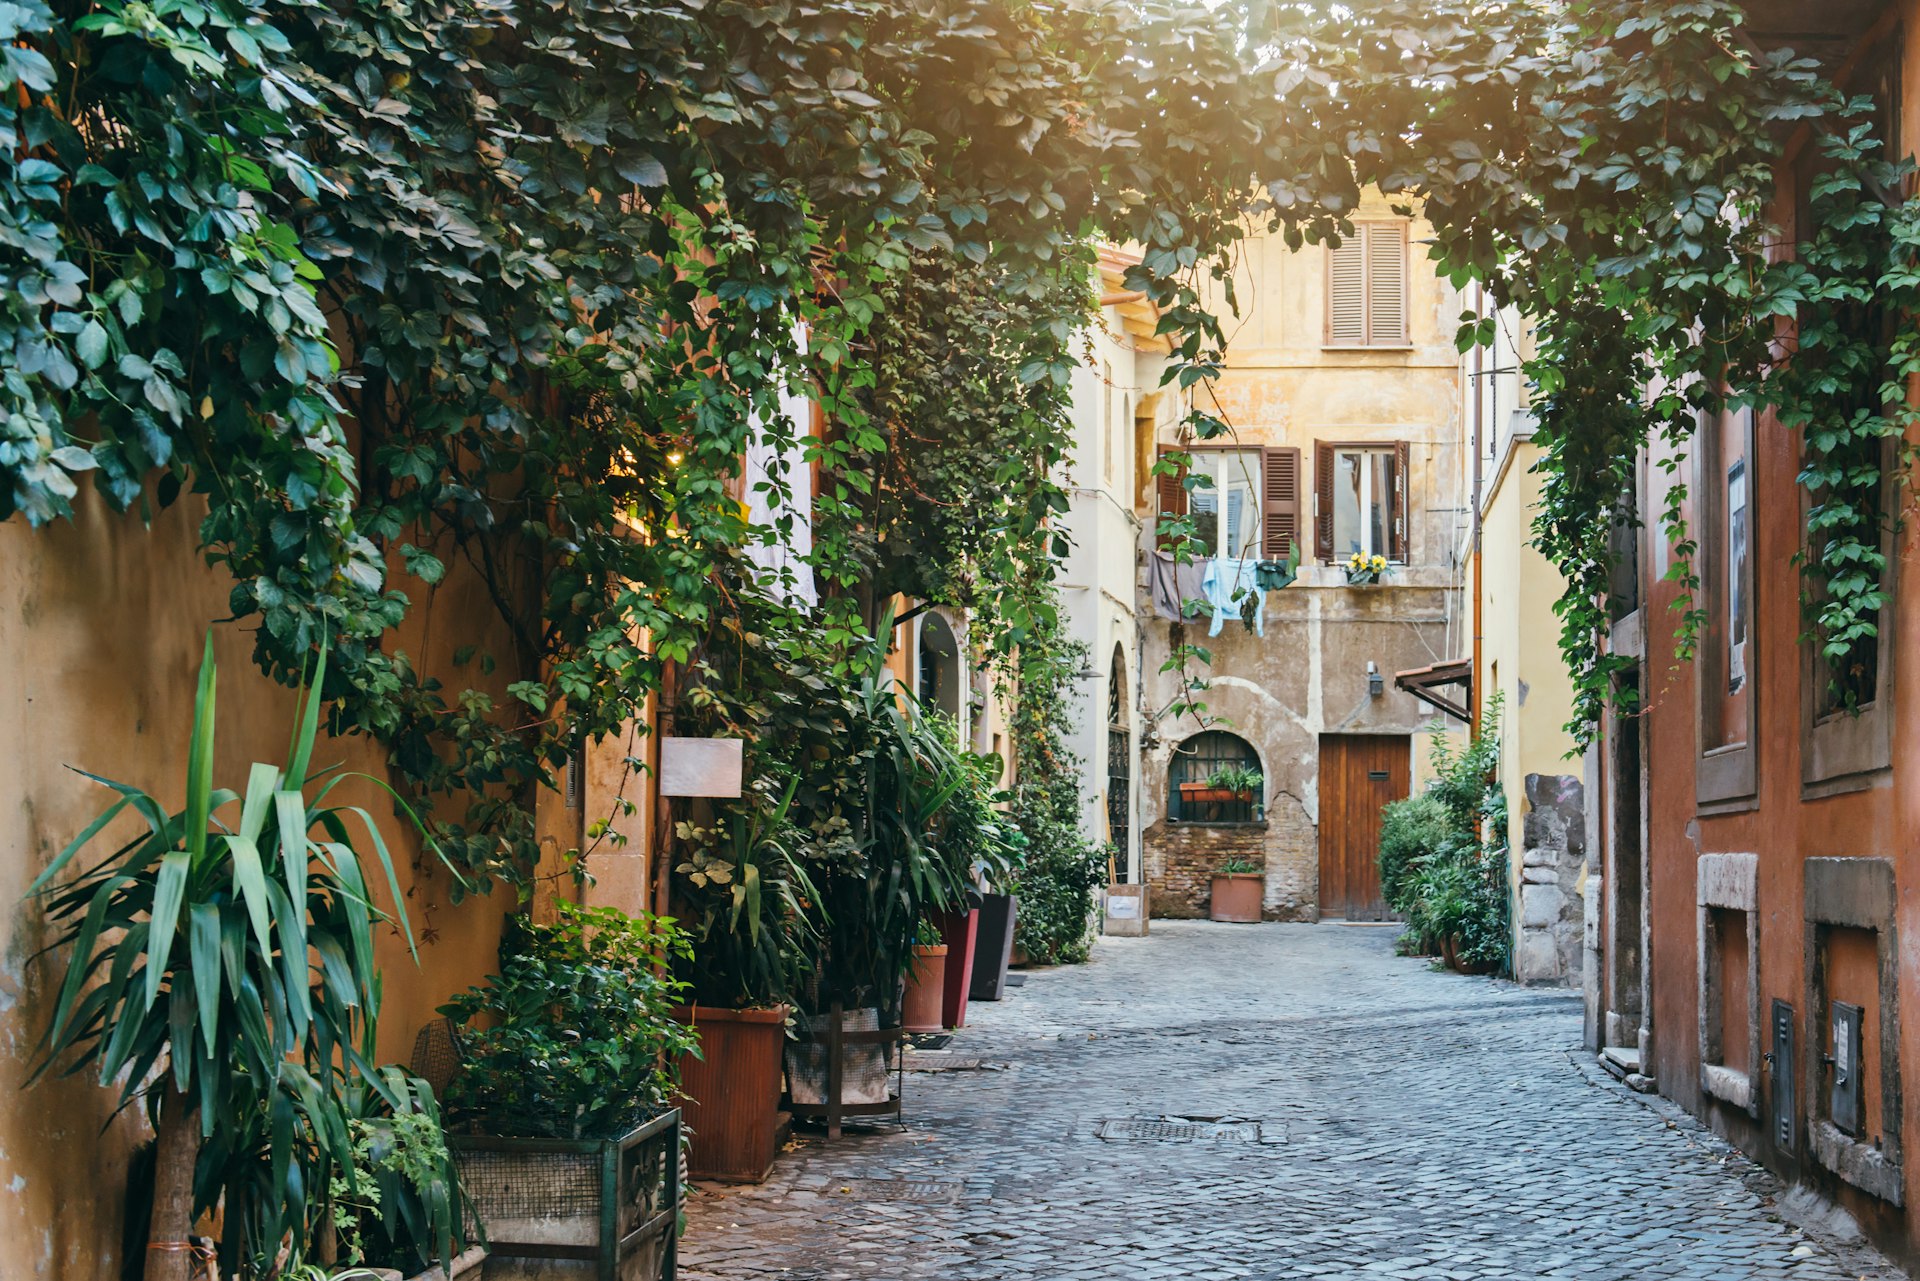 Plants are arranged around narrow doorways on both sides of a narrow cobblestone street in Trastevere, Rome